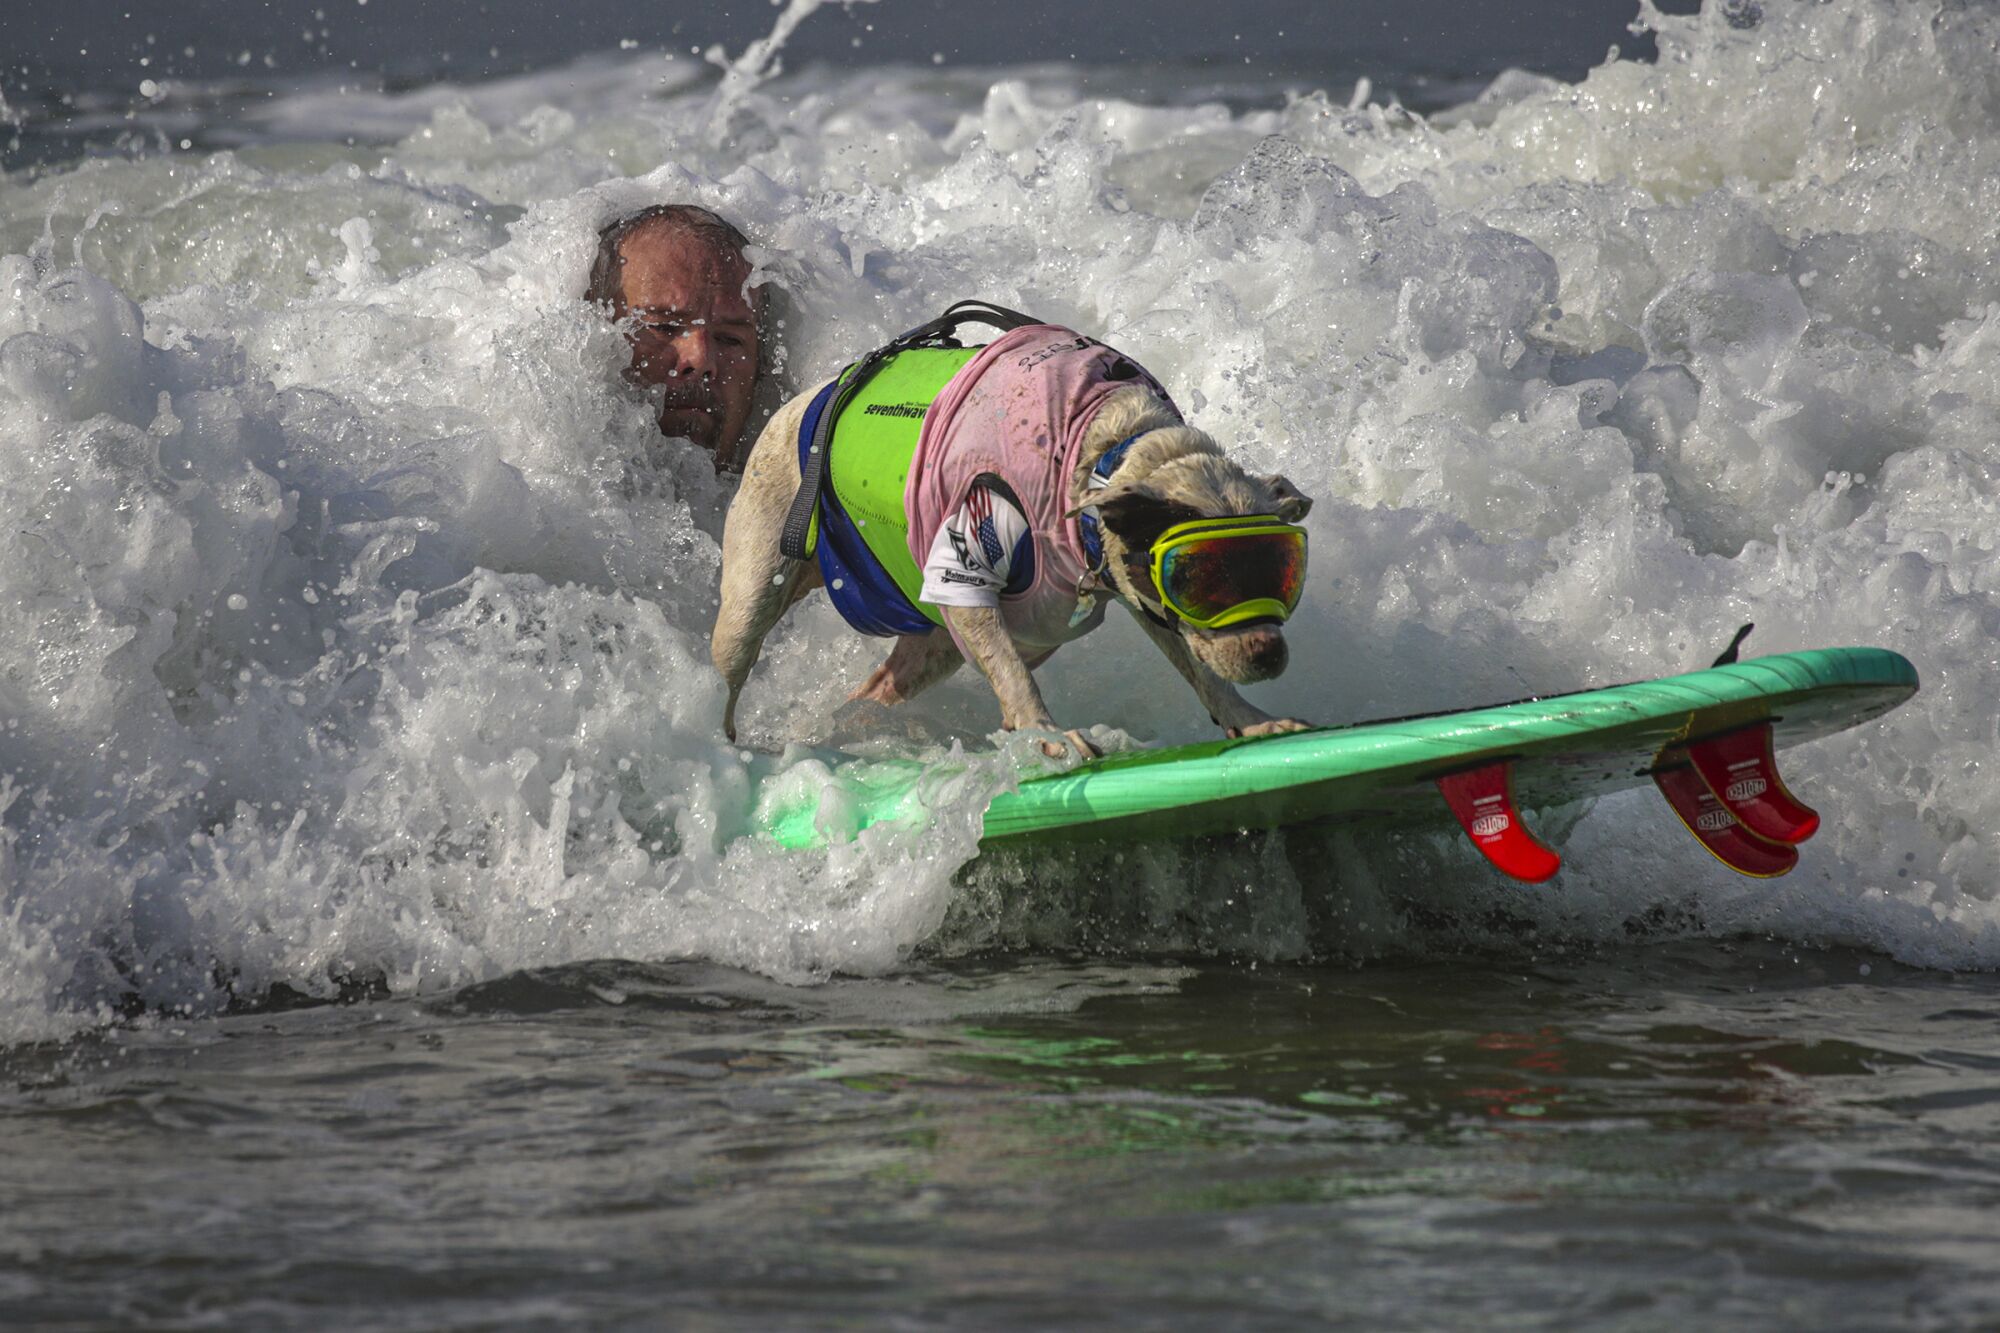 James Wall launches Faith, an American pit bull terrier, on to a wave